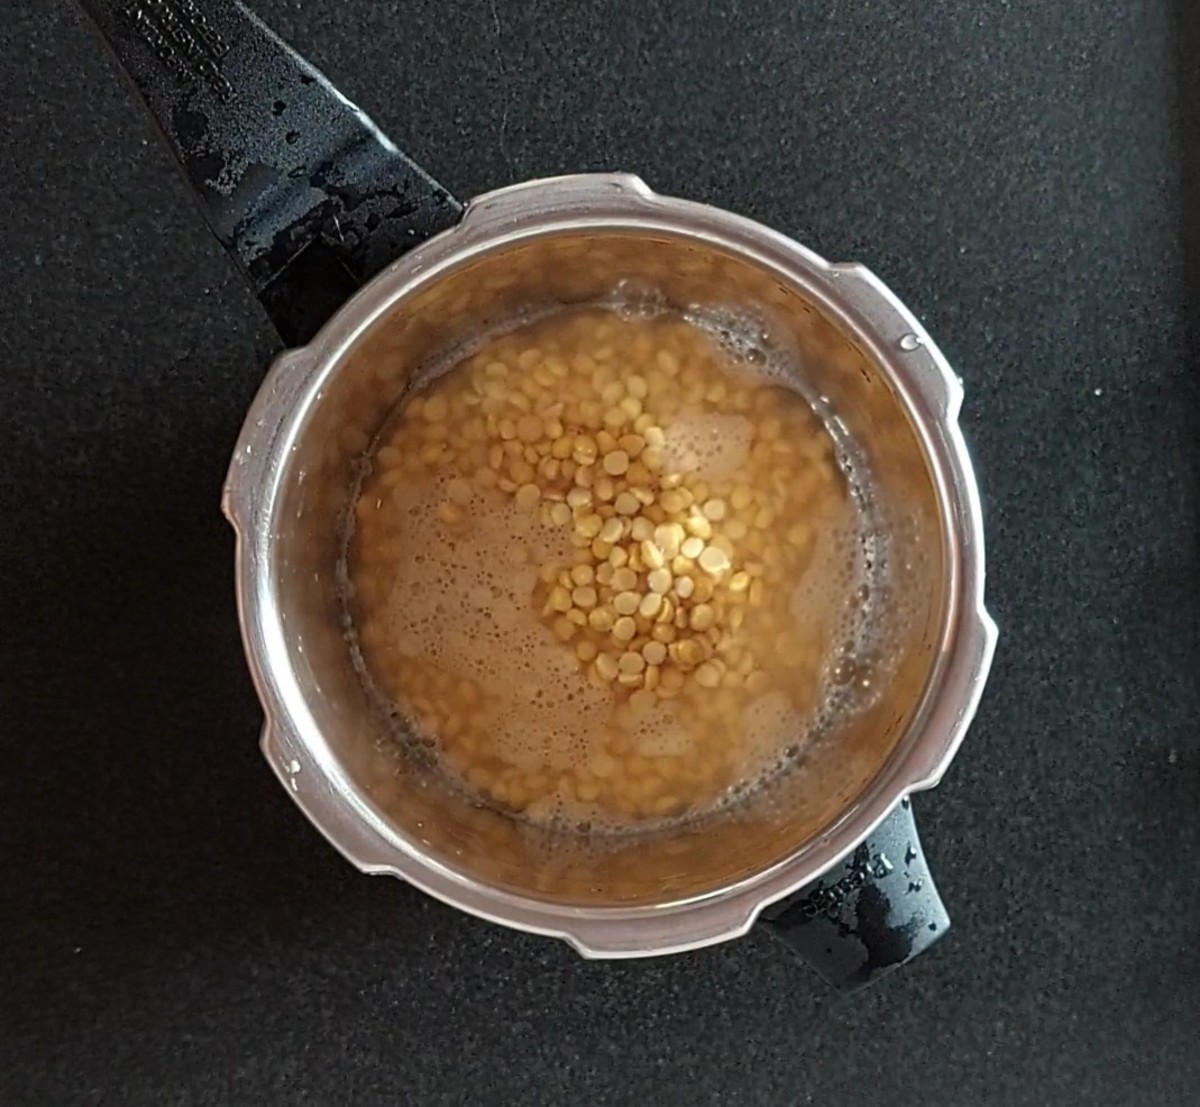 After soaking, transfer the chana dal to a cooker along with the soaking water. Close the lid and take 3 whistles over medium flame.